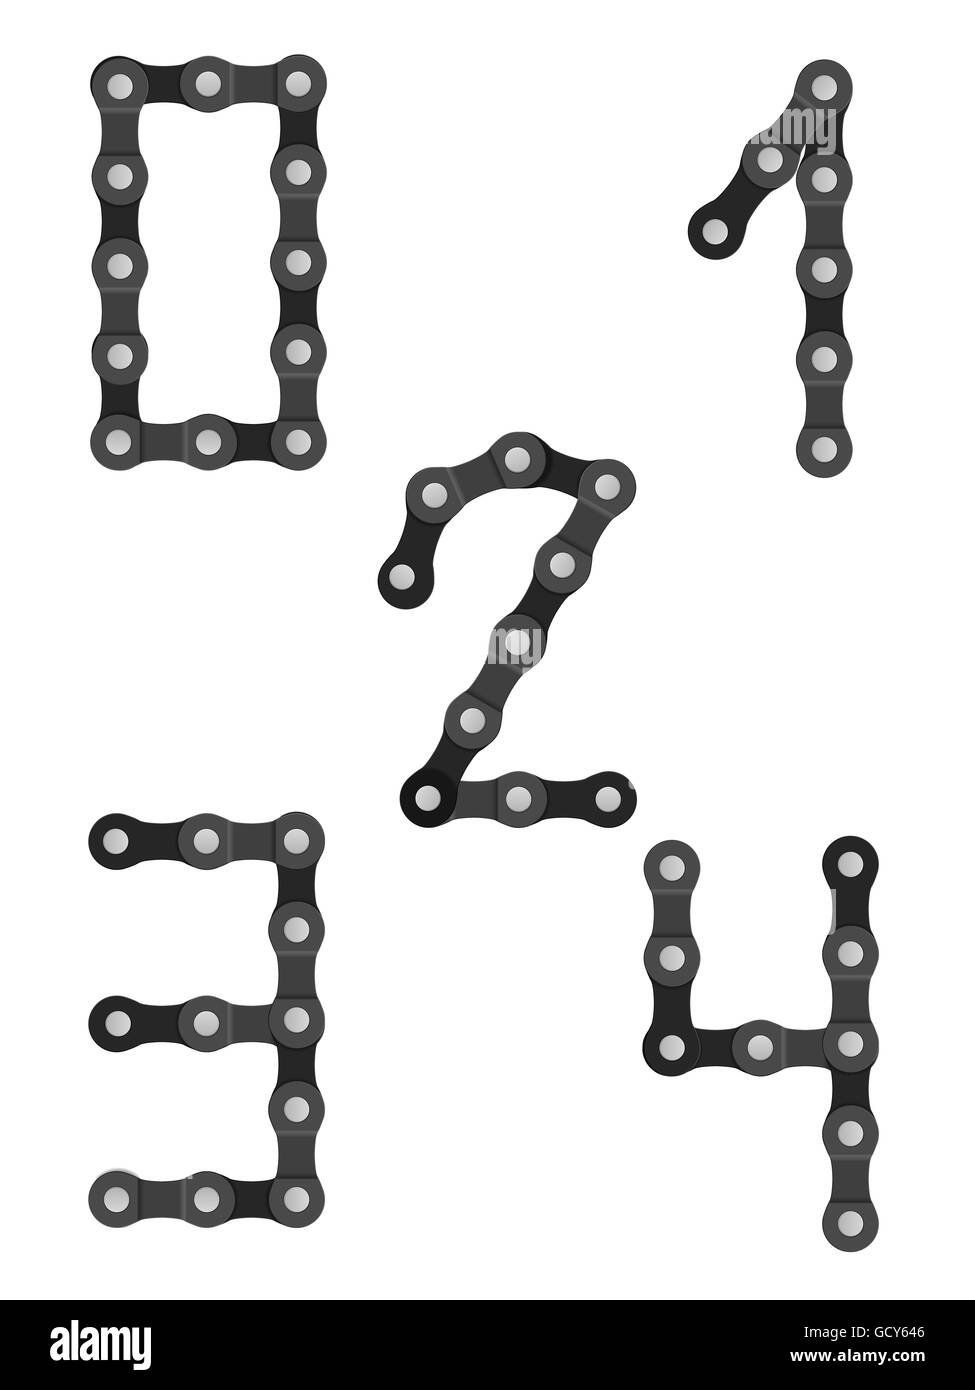 Bike chain number 0 to 4 on a white background. Stock Photo